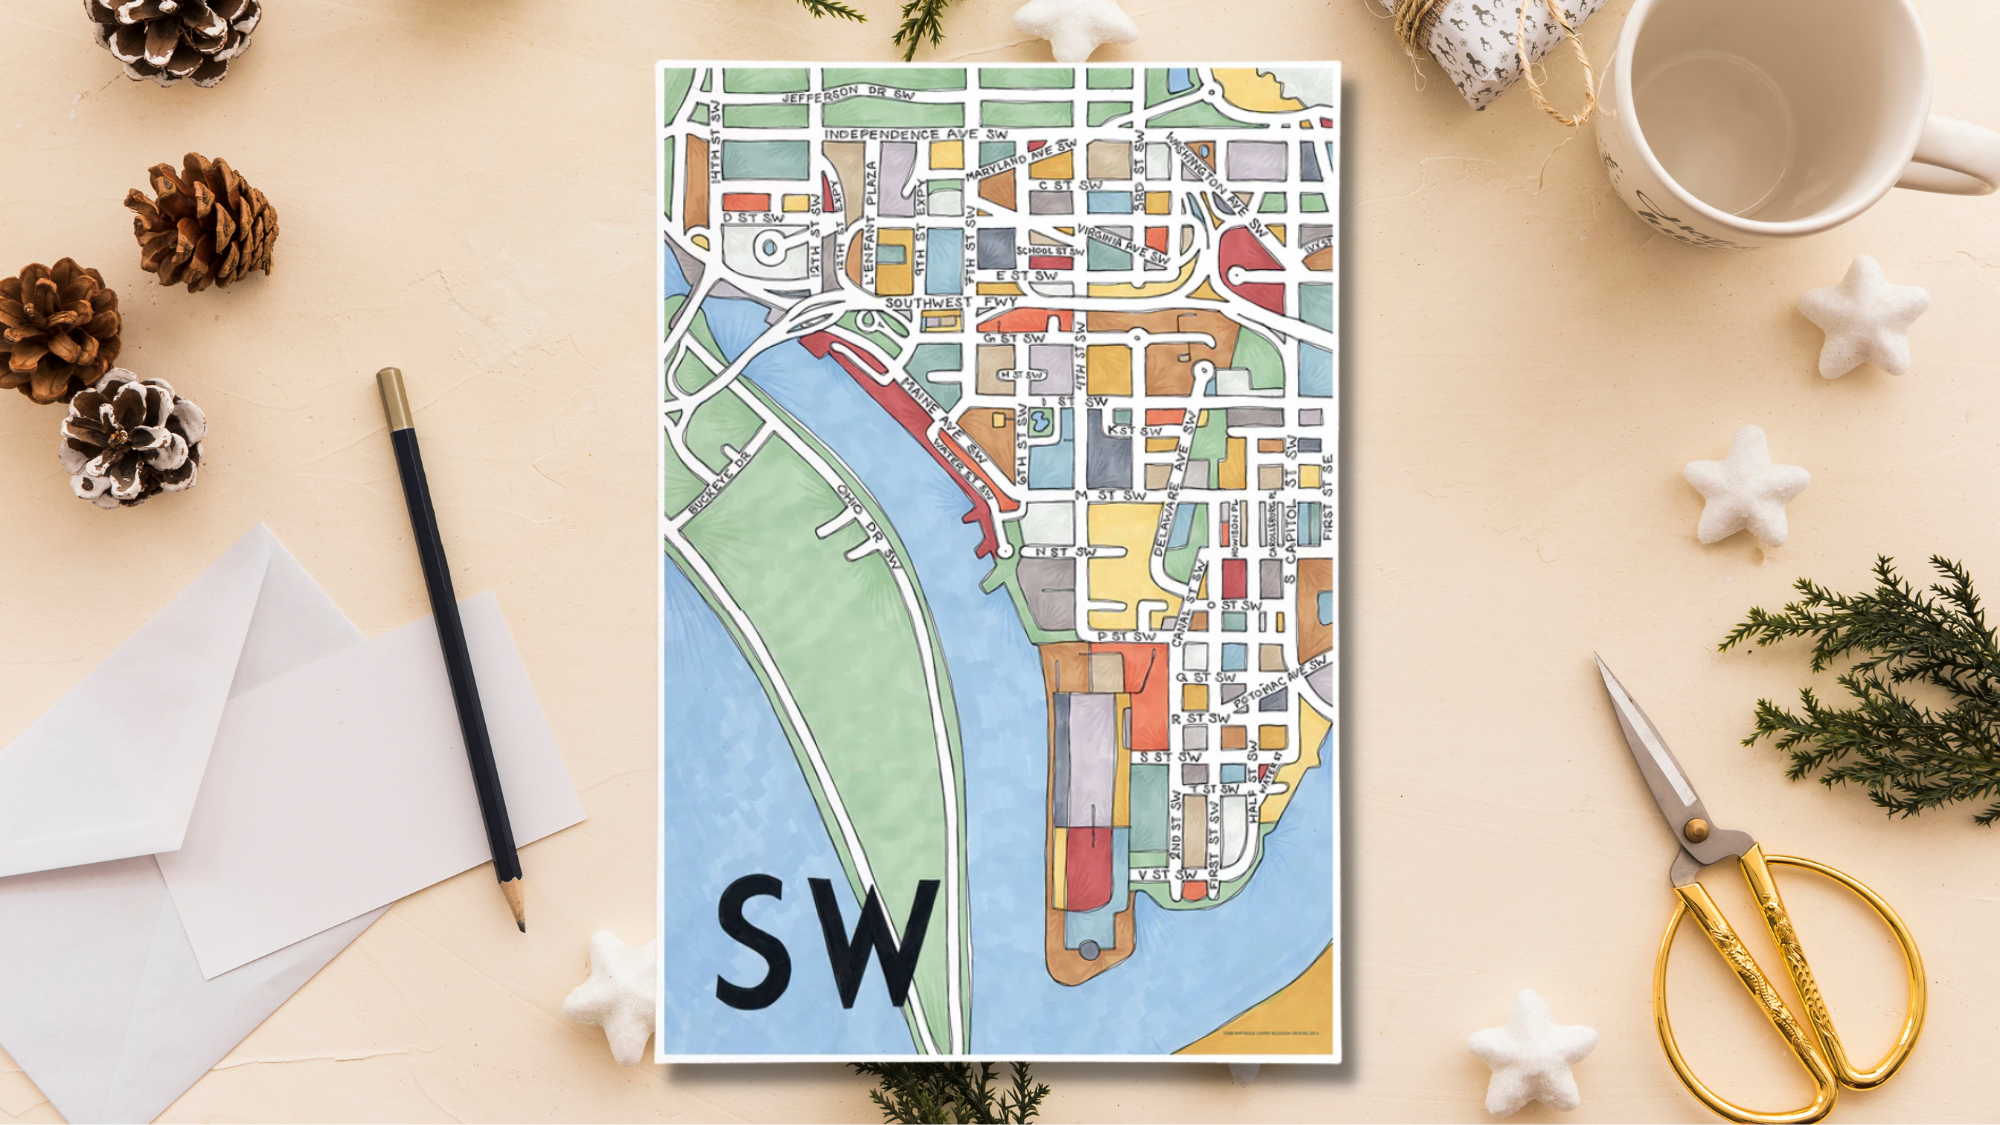 Holiday Gift Guide - Torie Partridge illustrated maps from Terratorie